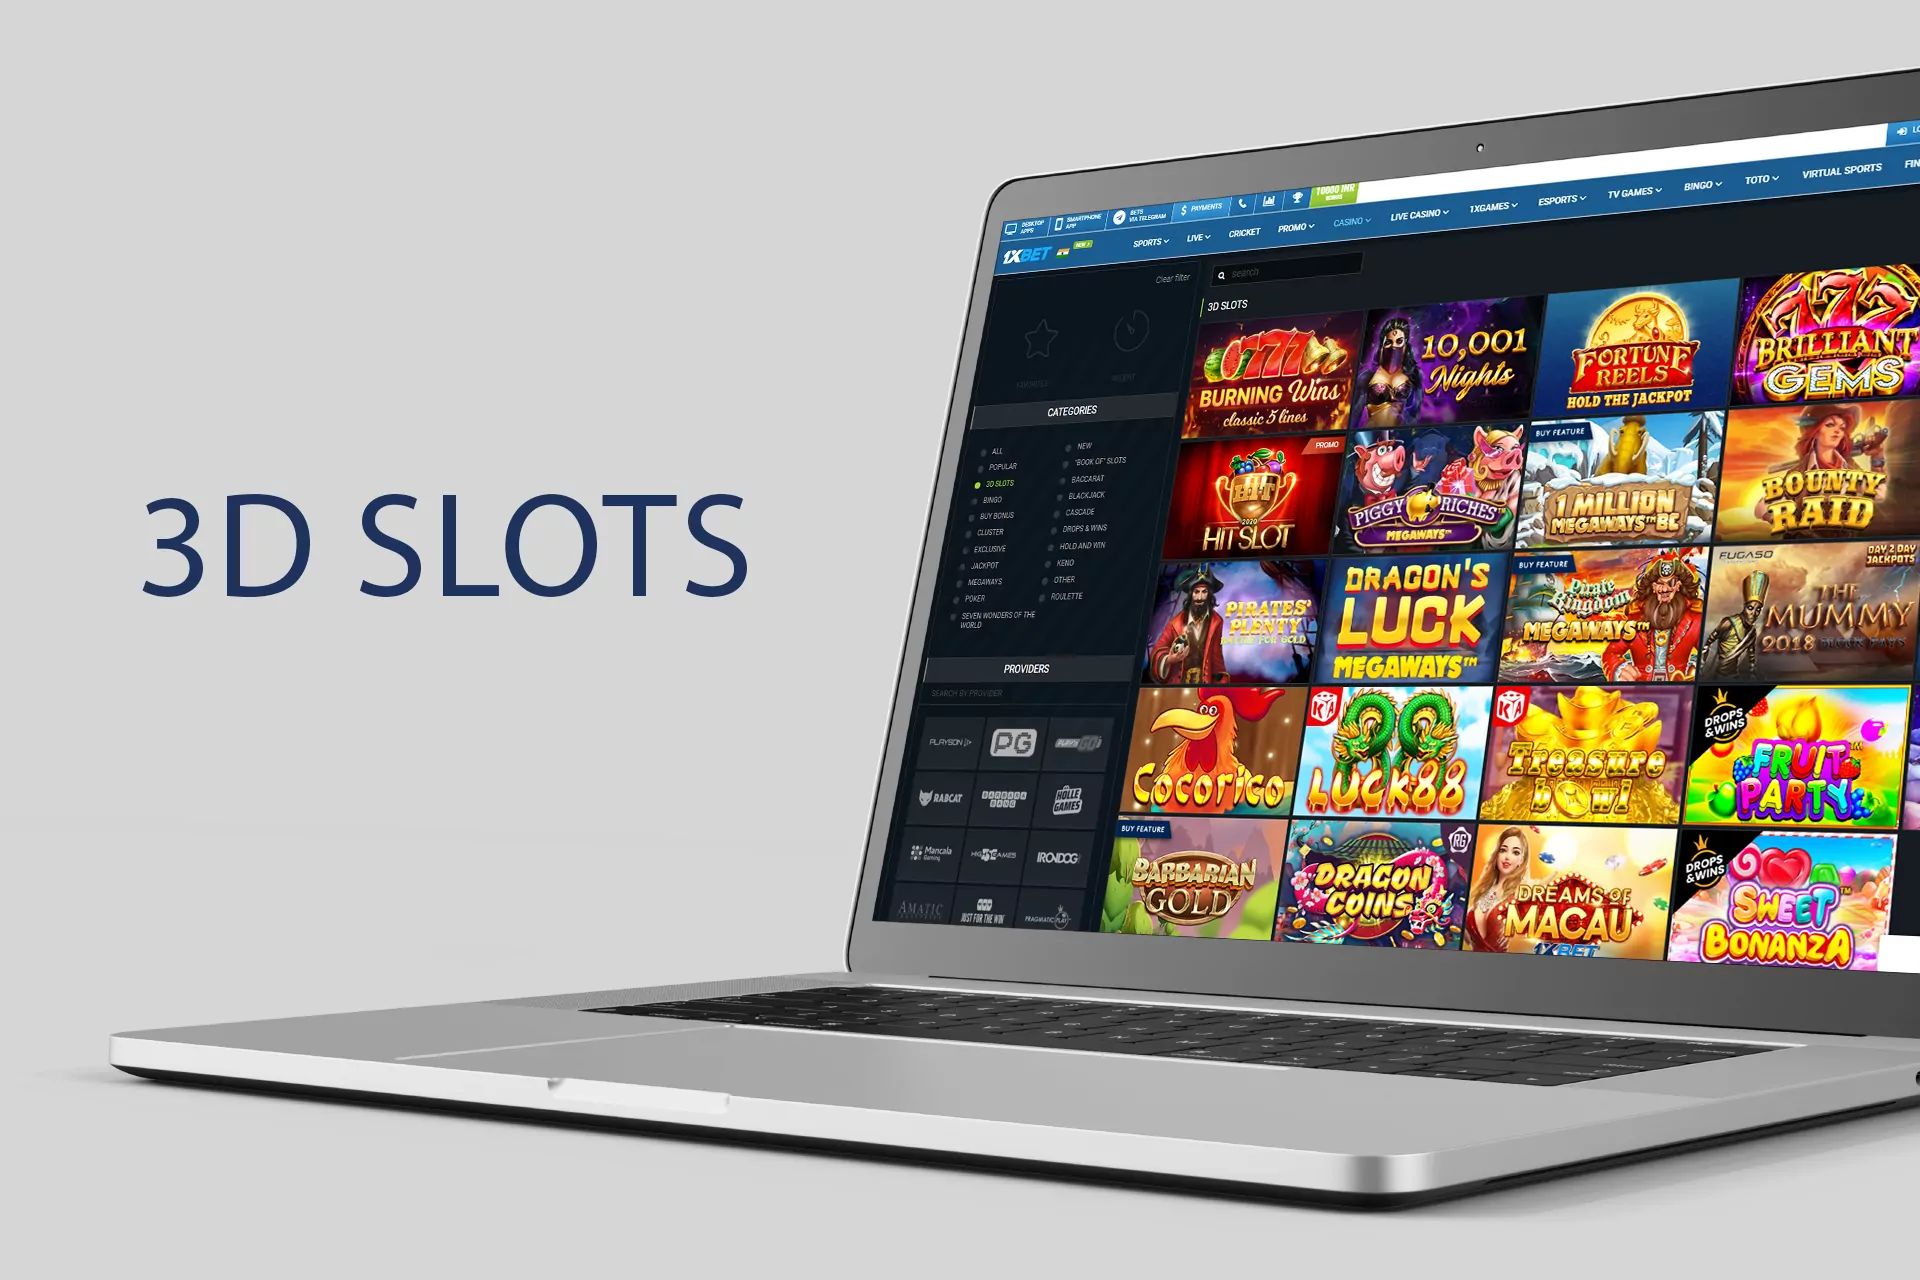 3D Slots are available at 1xBet in India.